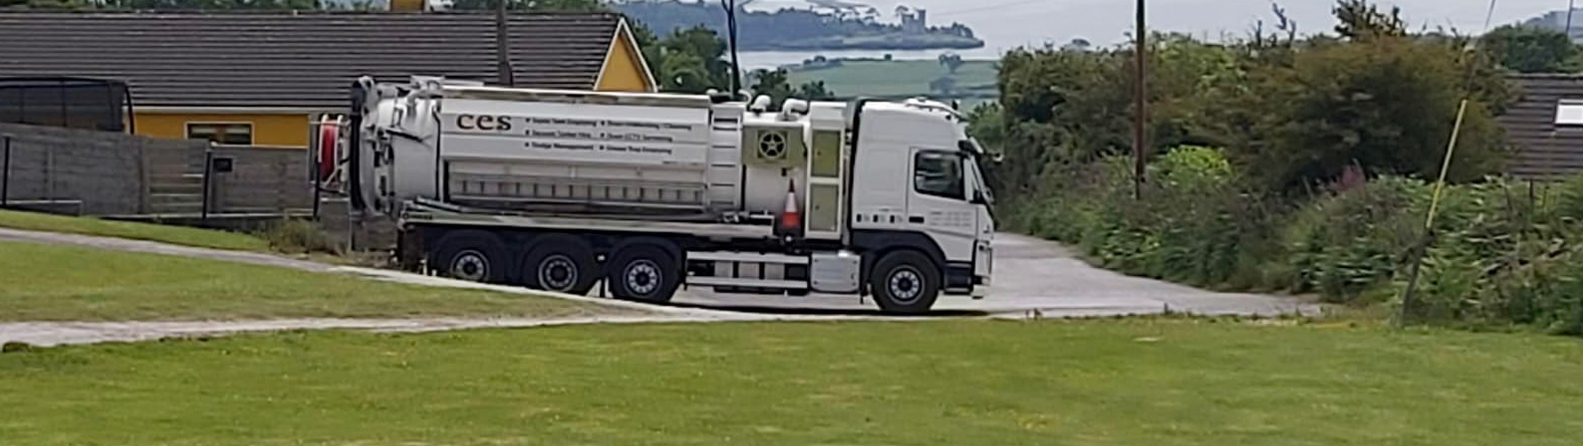 Septic Tank Cleaning Clare Limerick Galway - CES Environmental Services - Emptying, Pumping & Inspecting